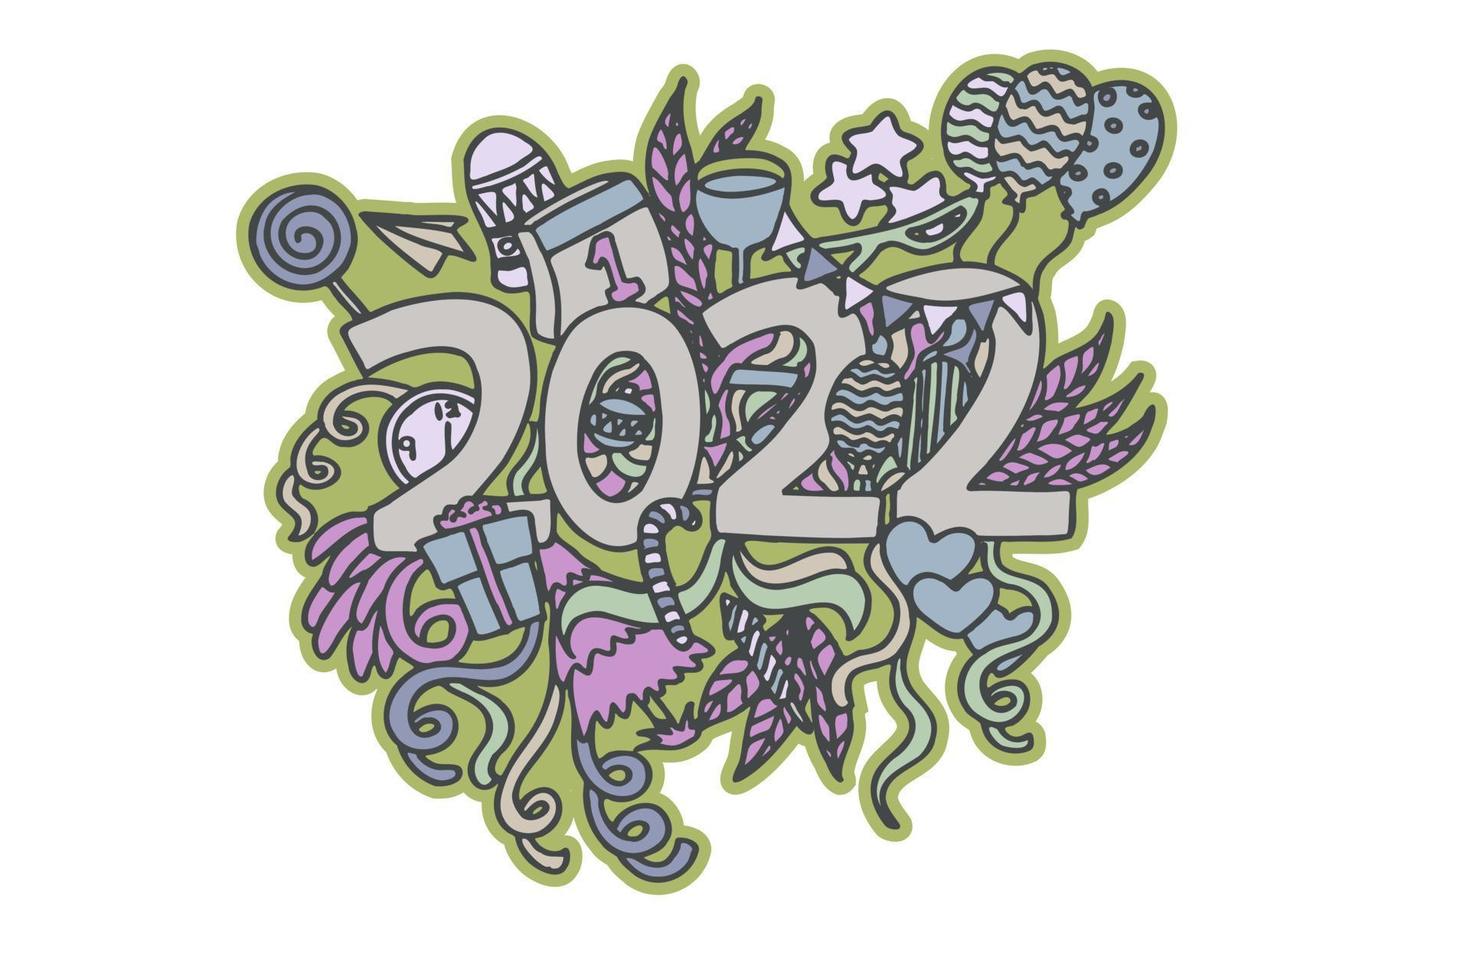 Happy new year 2022 abstract doodles vector